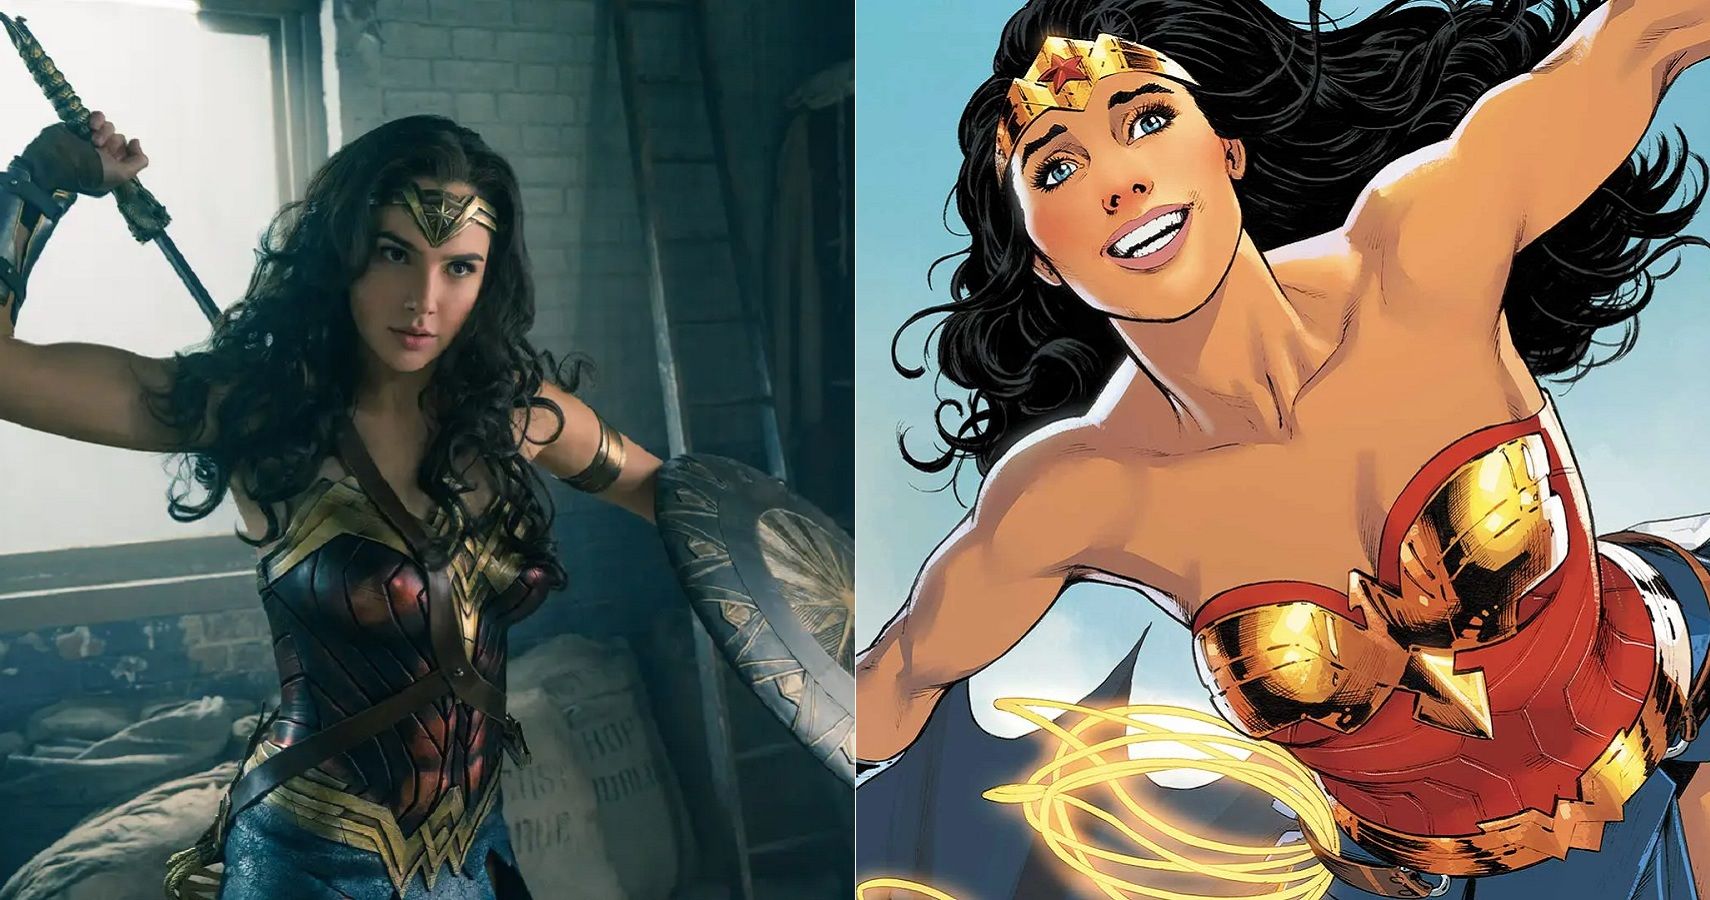 Split image of Wonder Woman in the DCEU movies and DC Comics